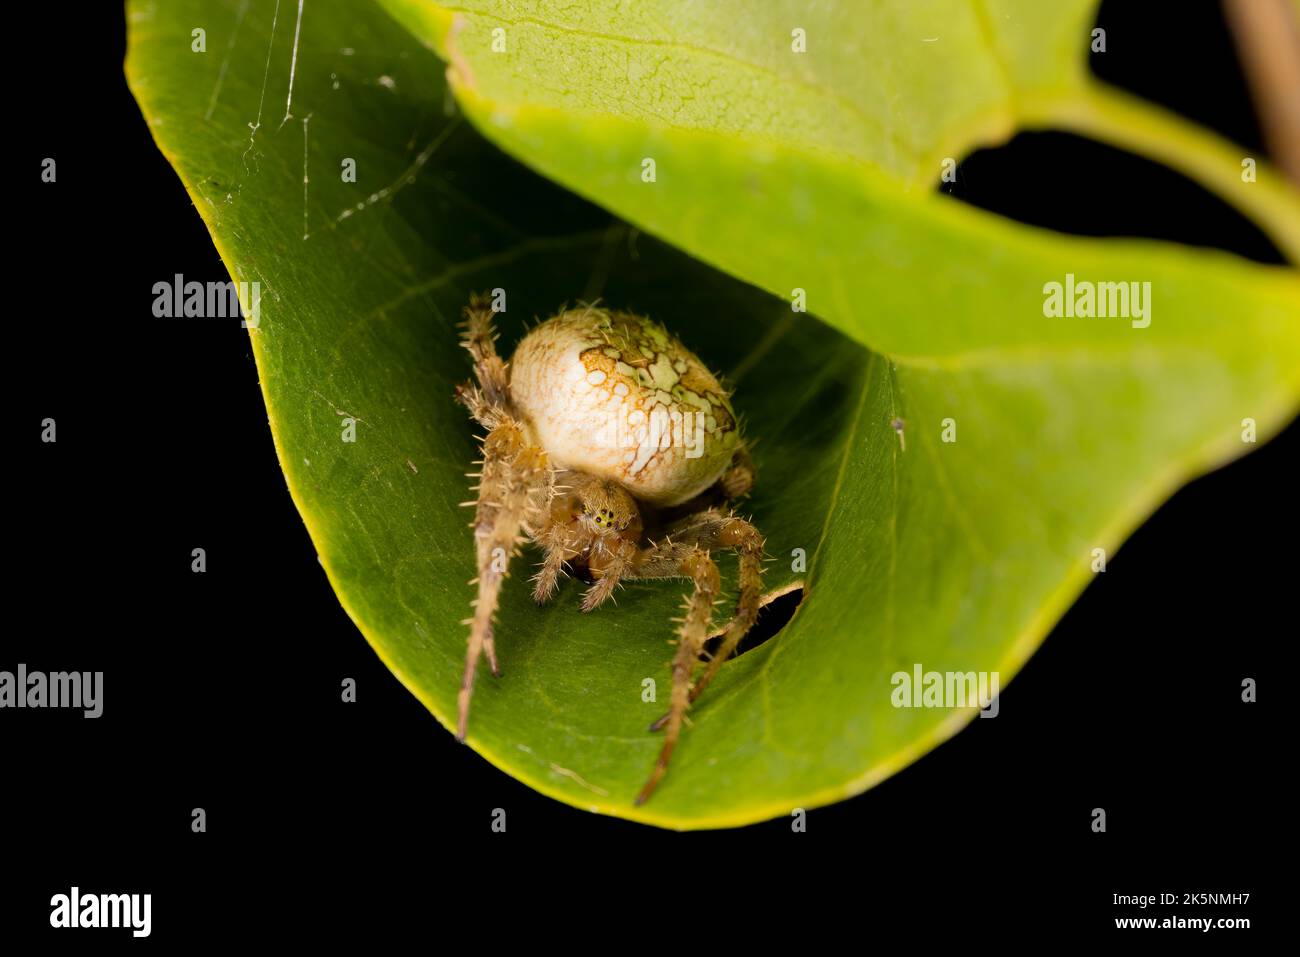 Dreaming on the leaf. beautiful crowned orbweaver (spider) staying on the leaf and waiting for the next victim. Closeup photo. Macro photo. Stock Photo